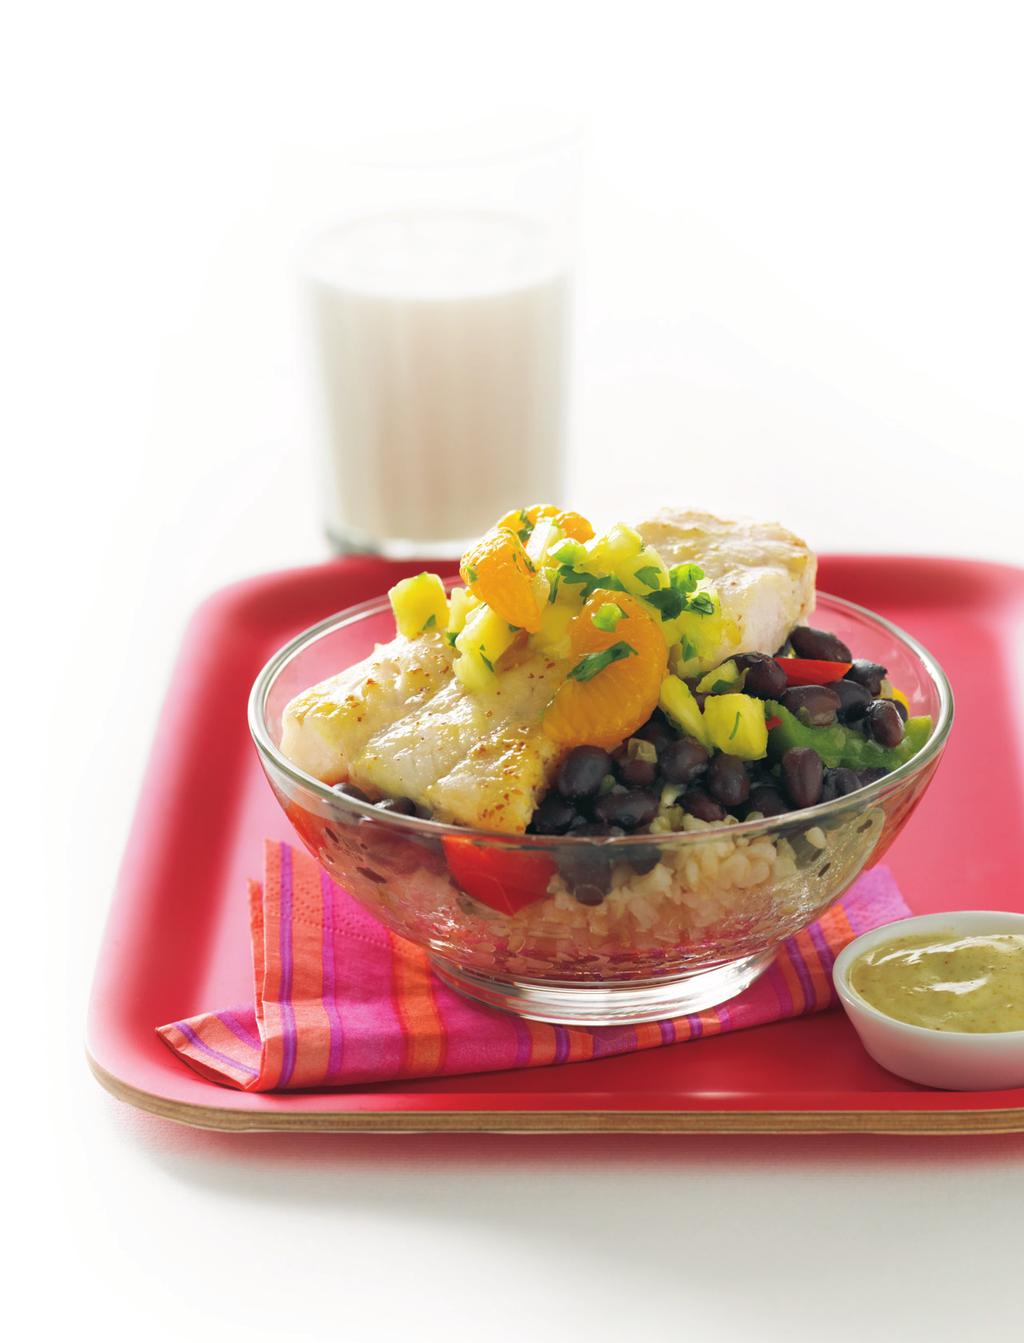 Tropical Rice & Beans with Alaska Pollock Yield: 12 Servings (One Serving = 1 Meat/Meat Alternate, ½ cup Fruit/Vegetable, 1 Grains/Breads) 12 Servings Once-frozen, 12 portion (2.